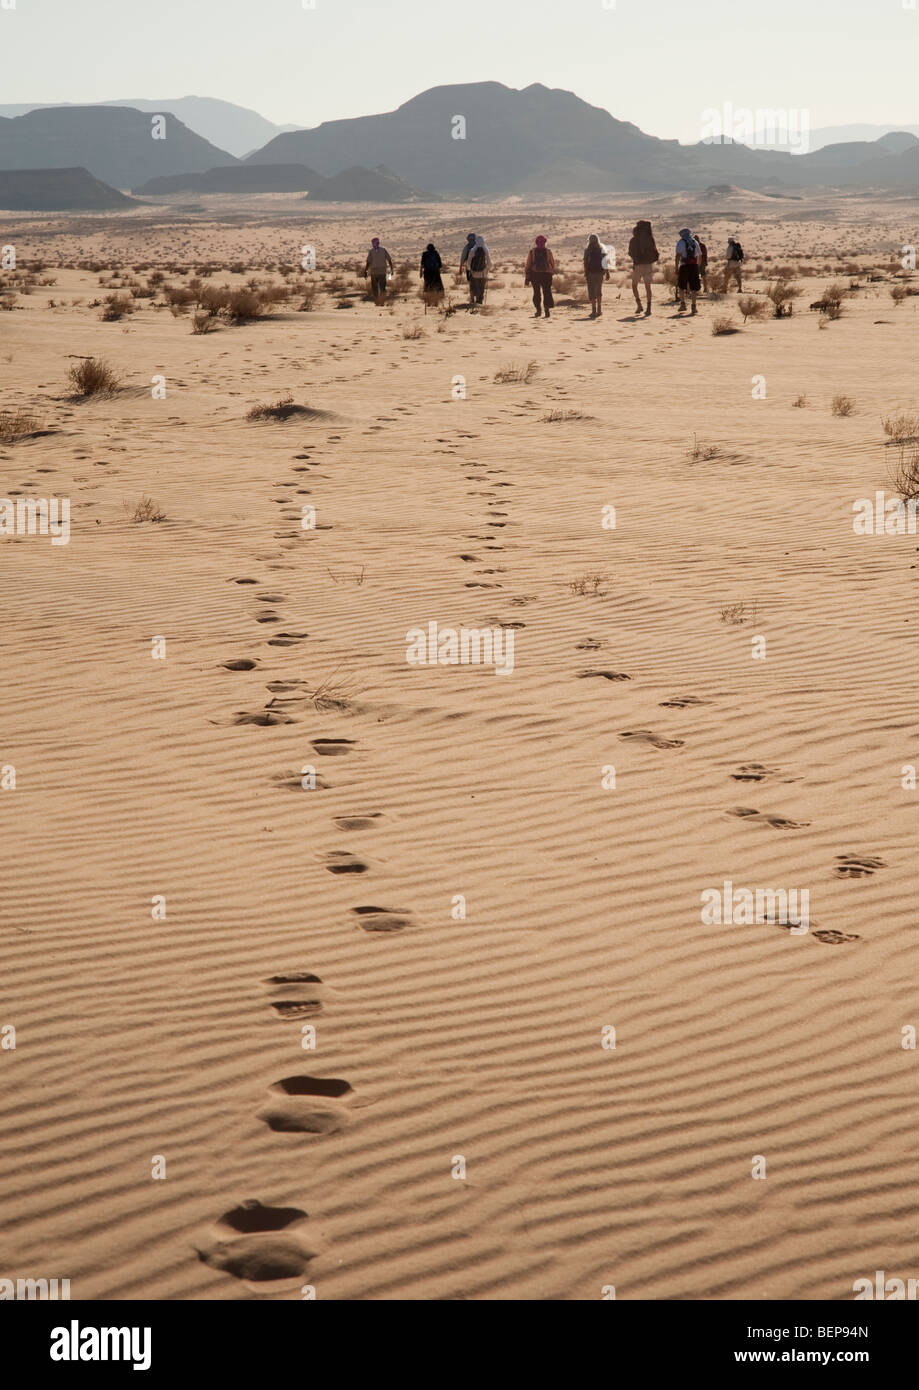 A group of people walking in the desert Stock Photo